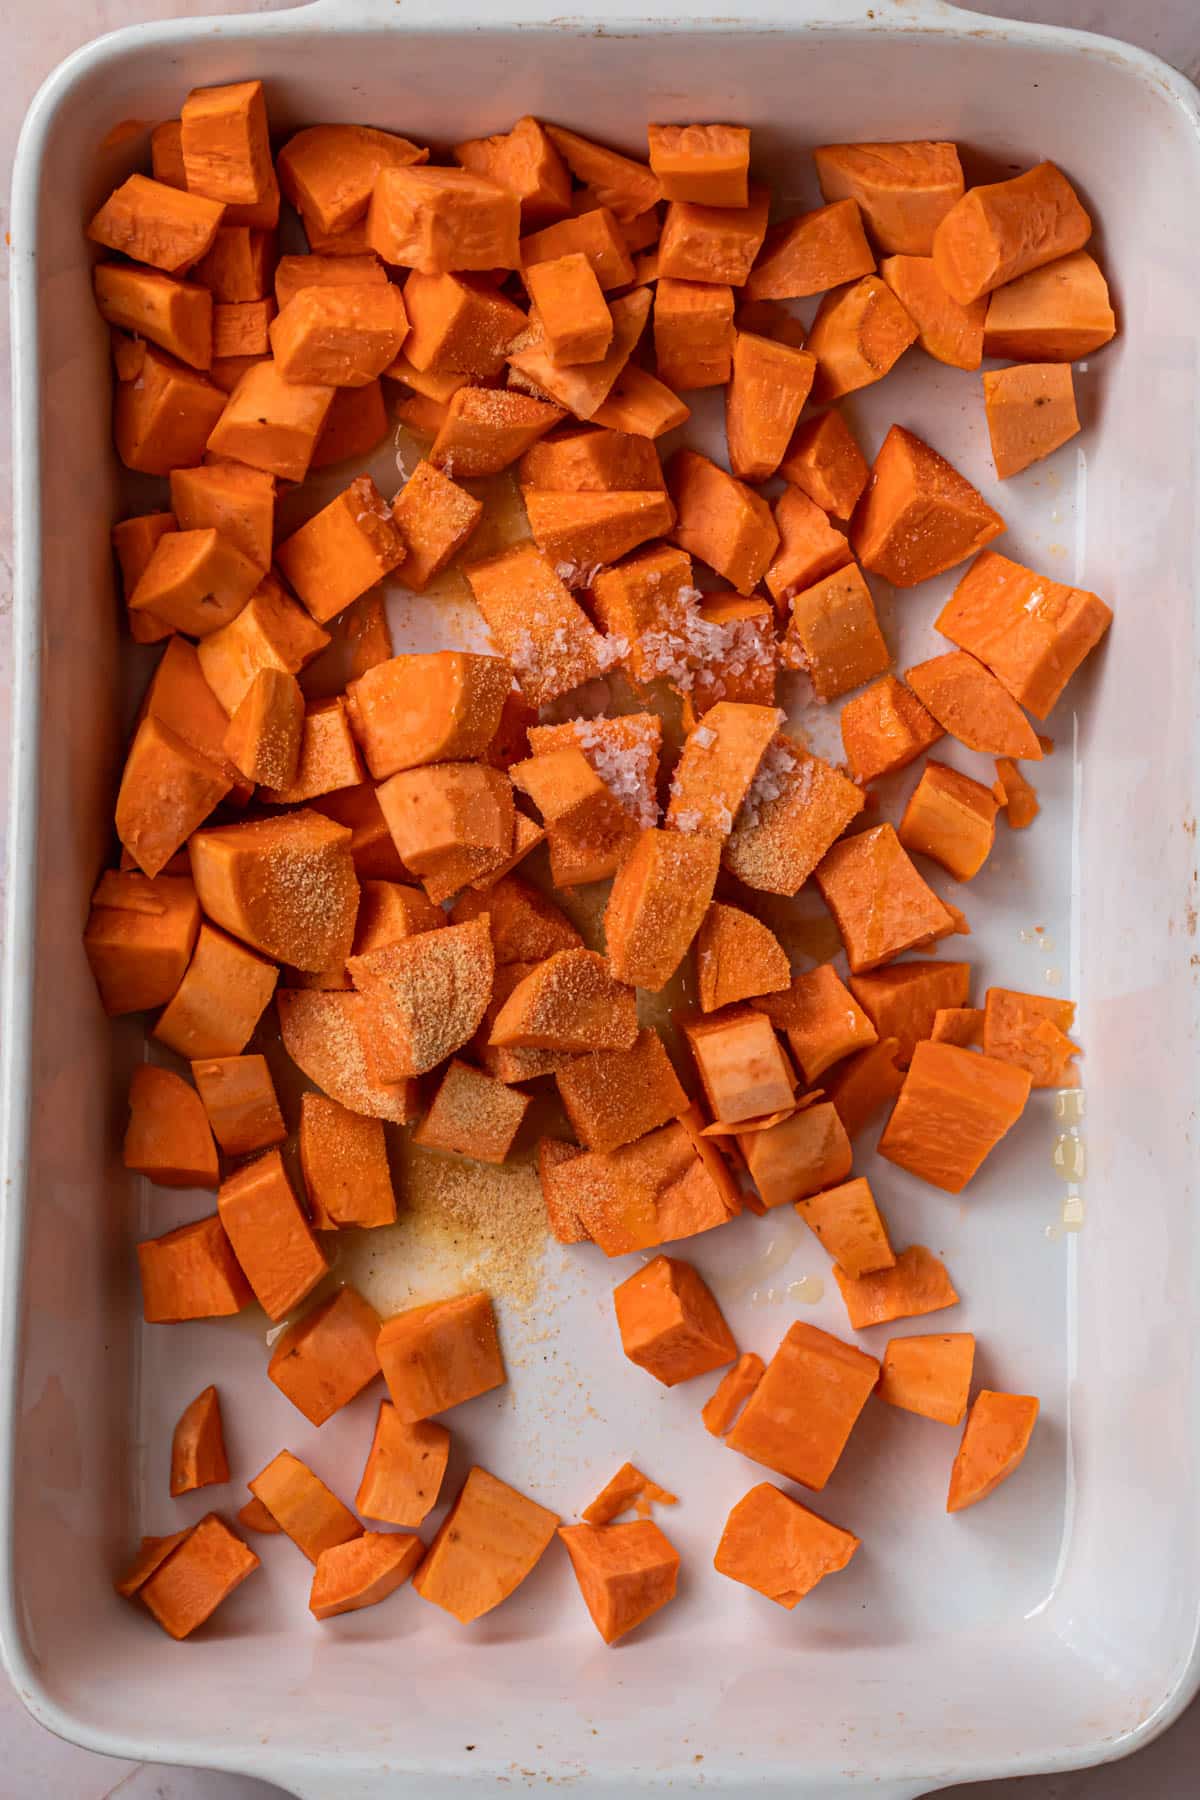 Sweet potato cubes in a large white baking dish with olive oil and seasoning.